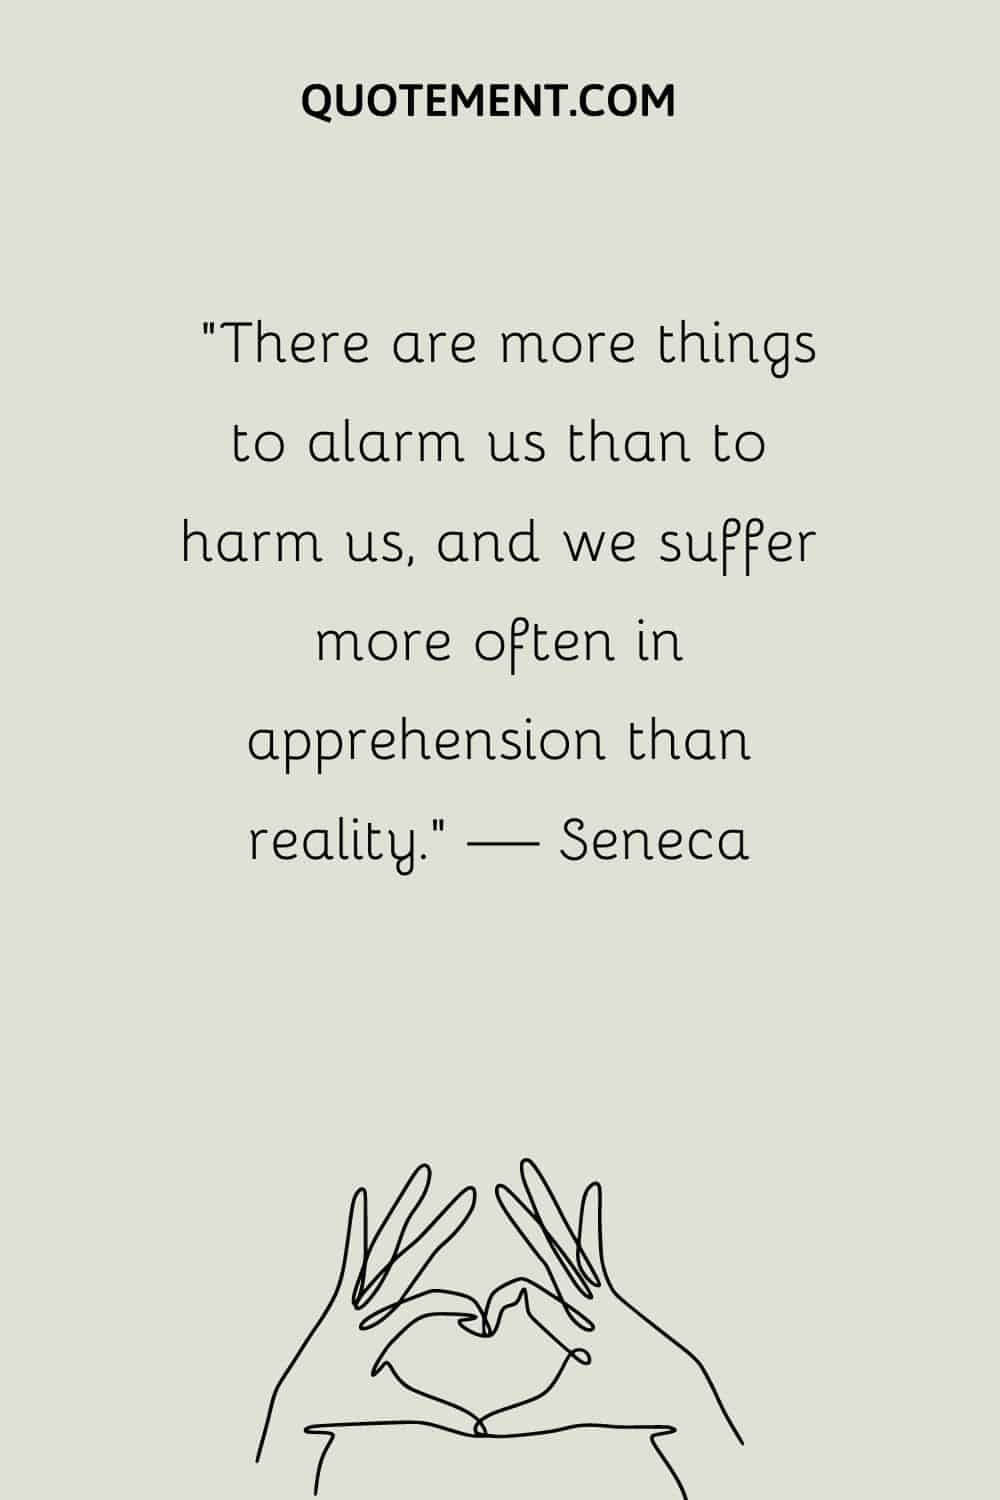 “There are more things to alarm us than to harm us, and we suffer more often in apprehension than reality.” — Seneca